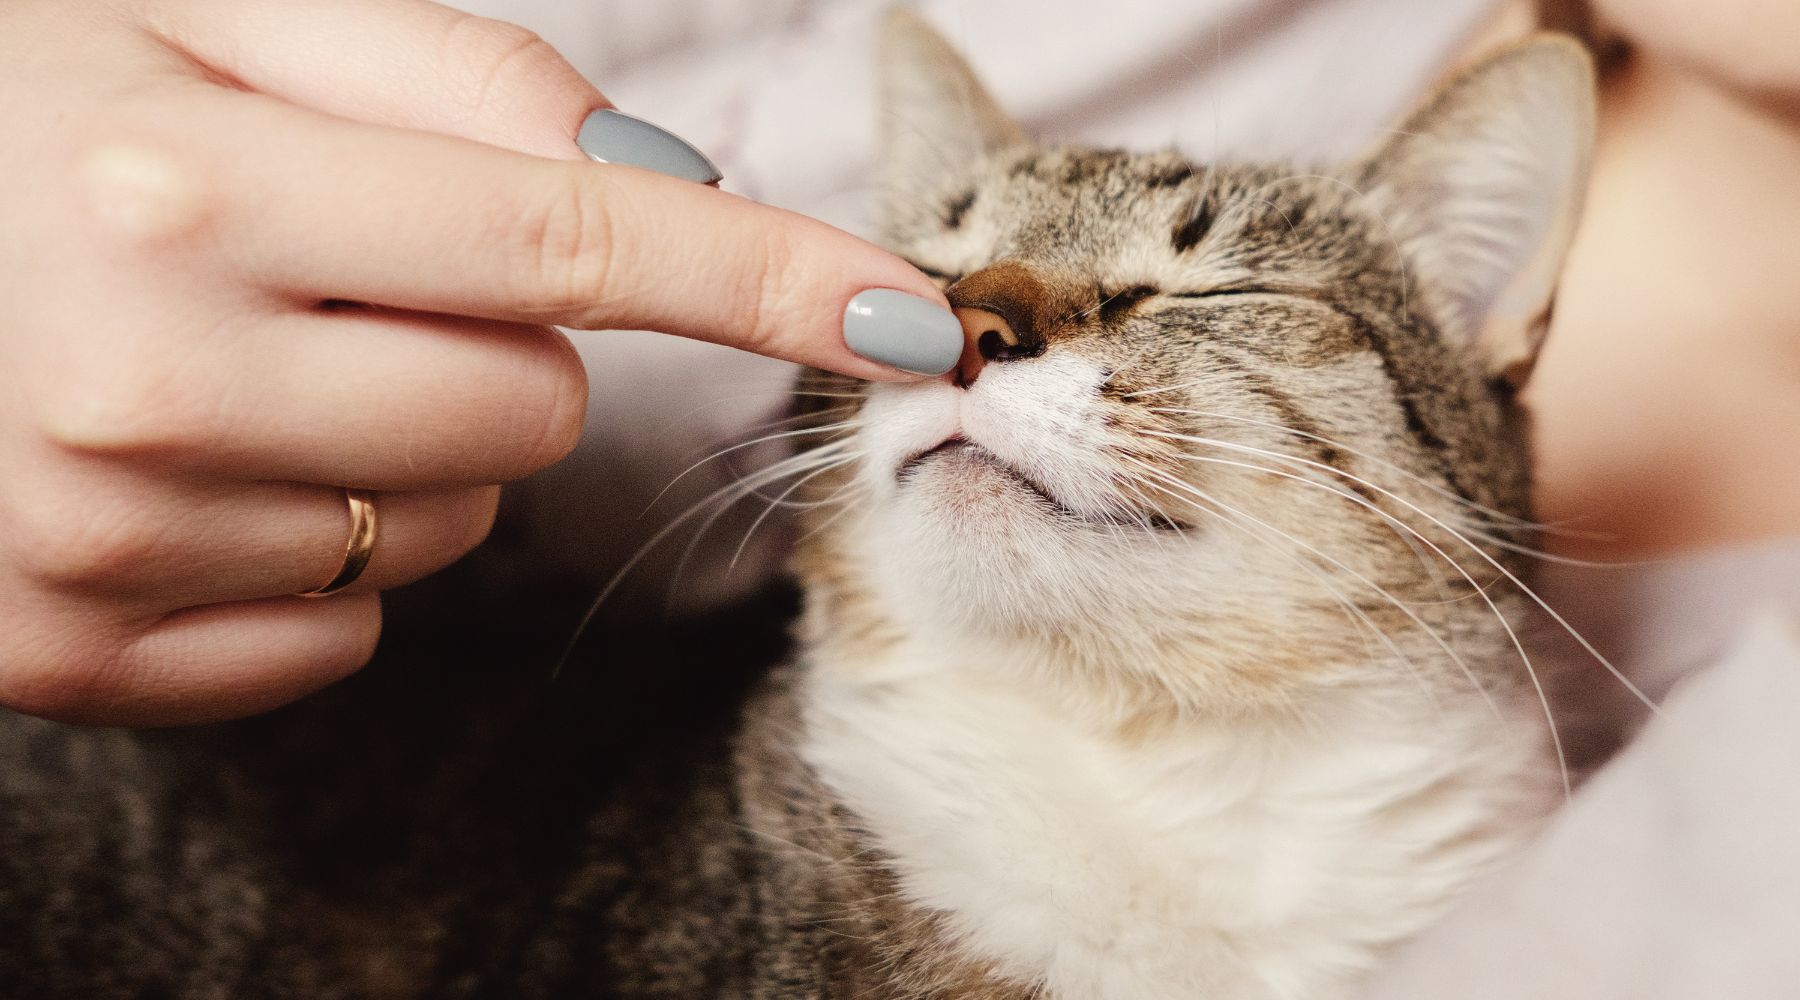 Touching cat's nose